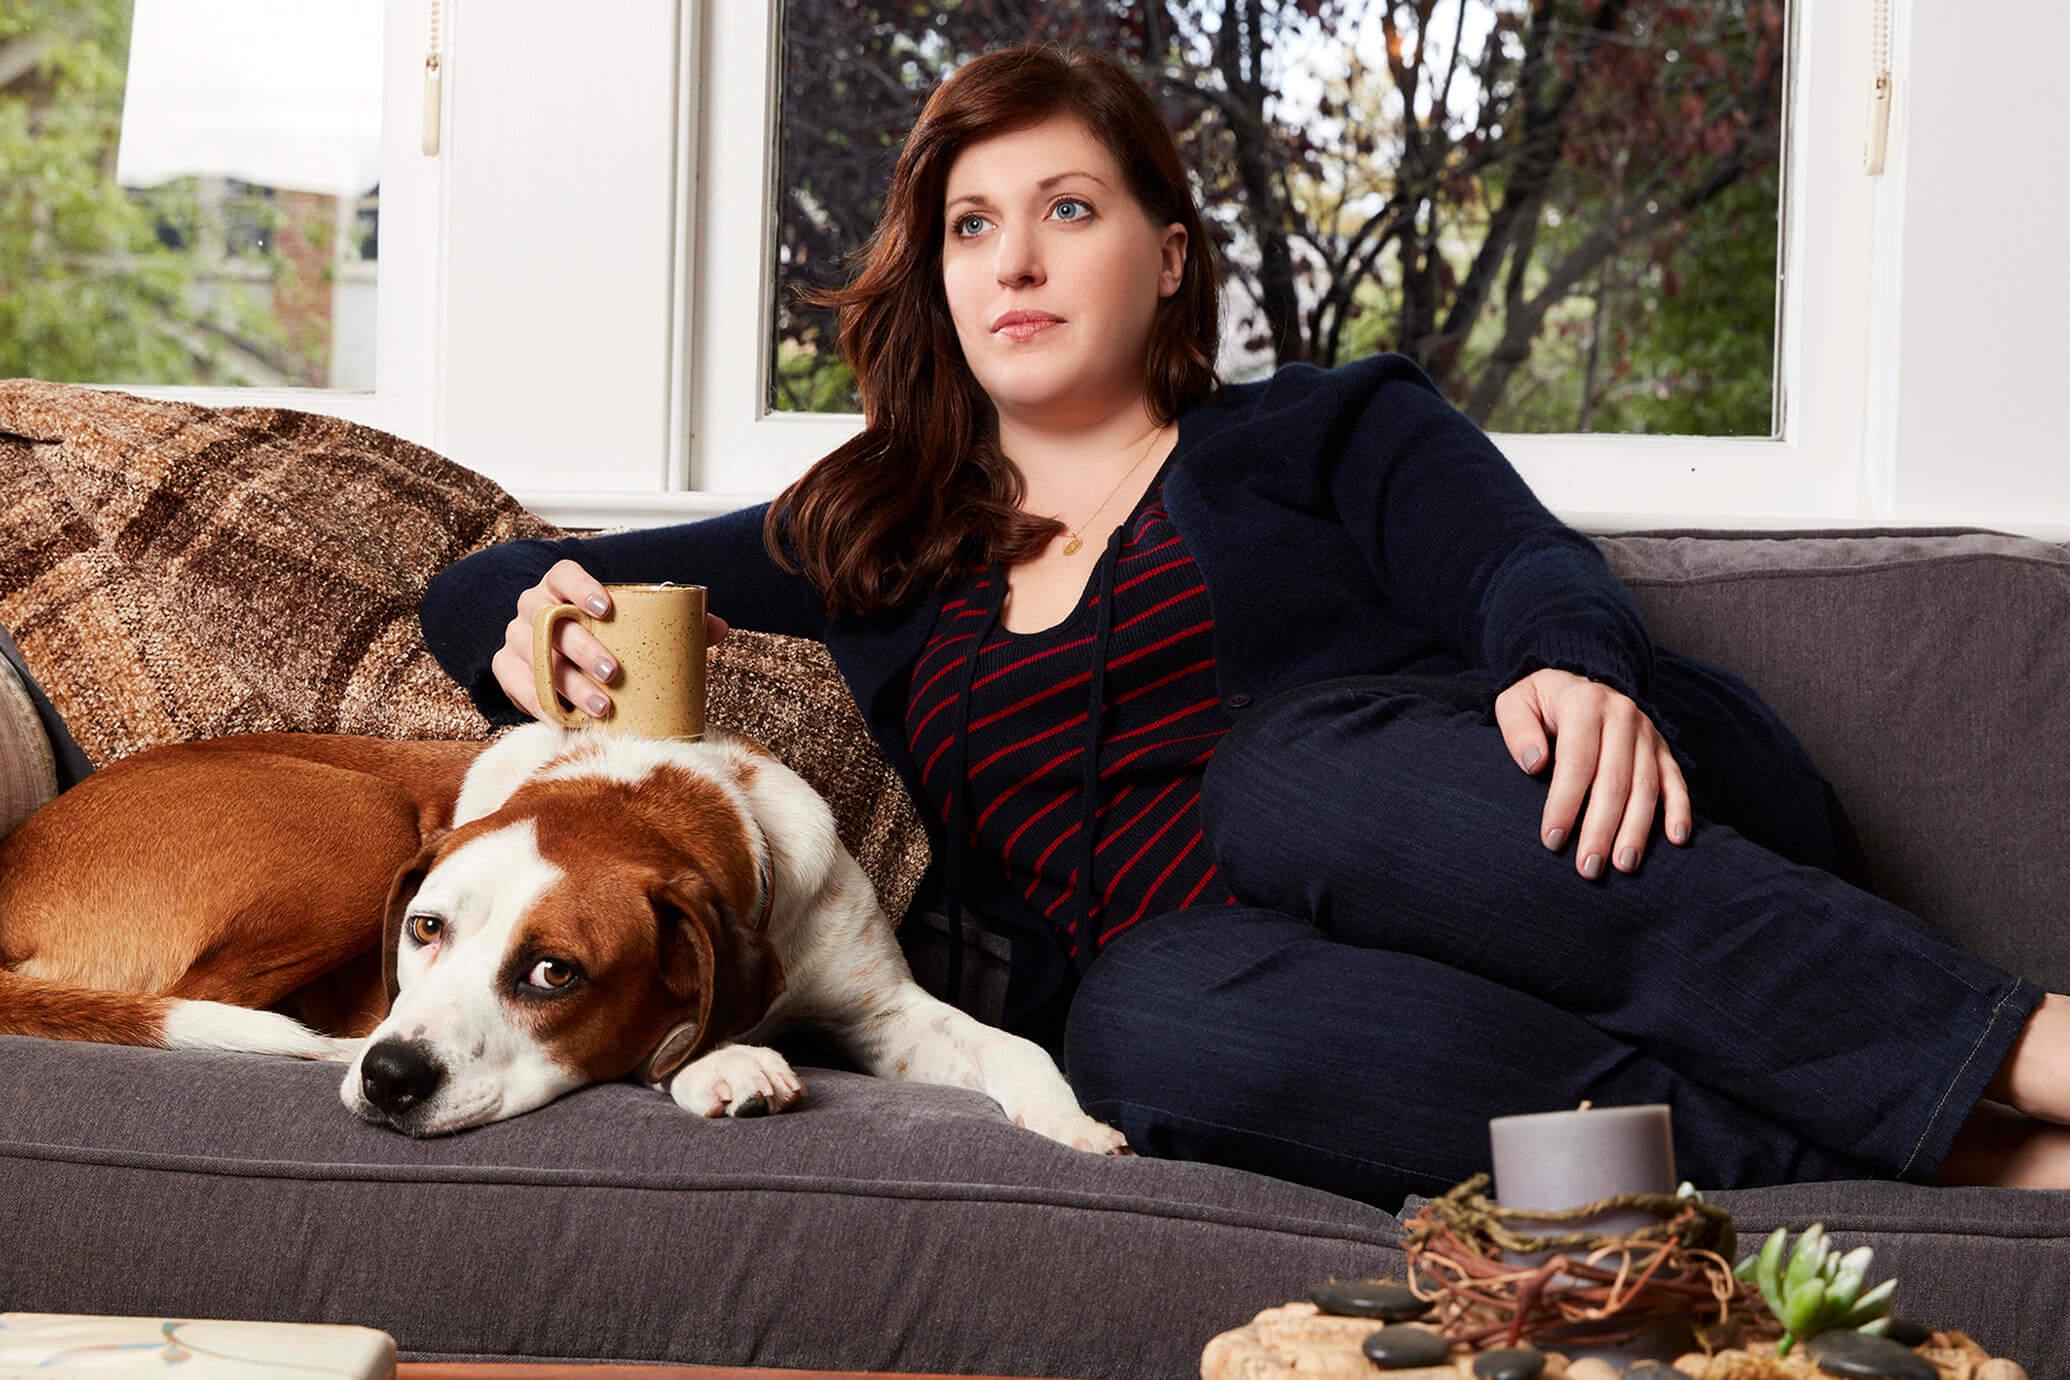 40+ Hot Pictures Of Allison Tolman Which Are Just Too Damn Cute And Sexy At The Same Time | Best Of Comic Books